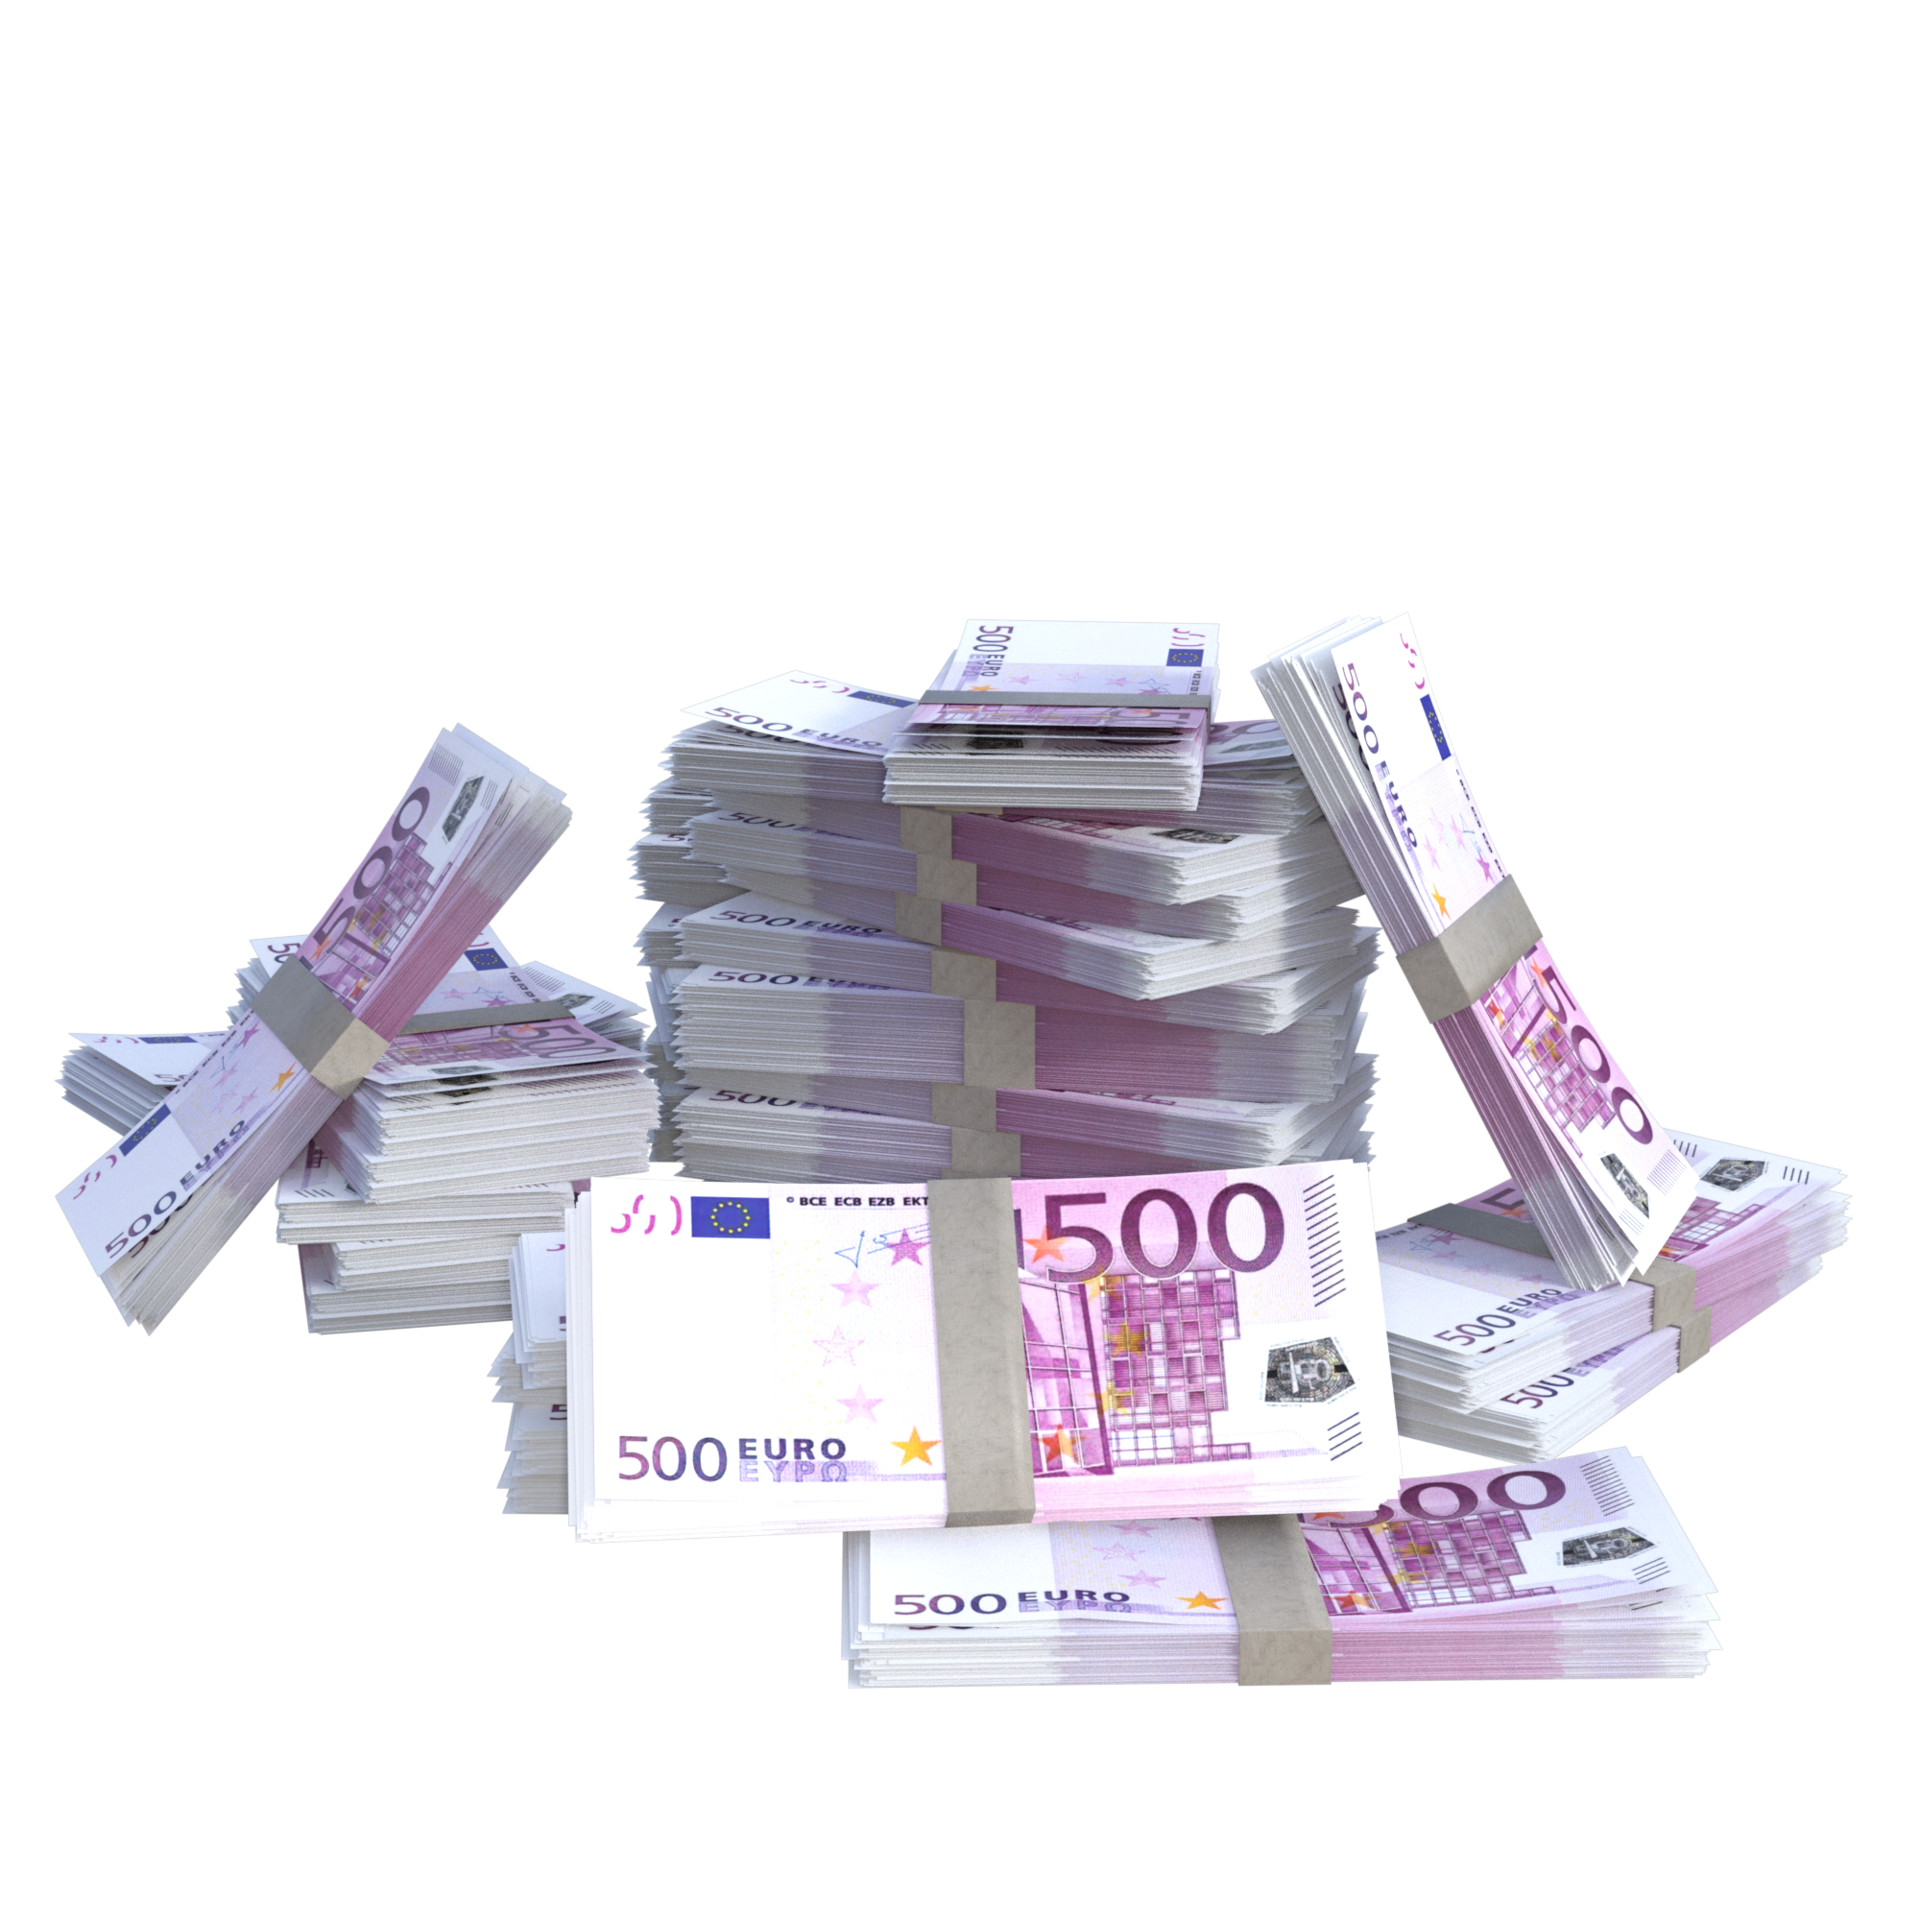 Euro millions 3d rendering 15337259 PNG